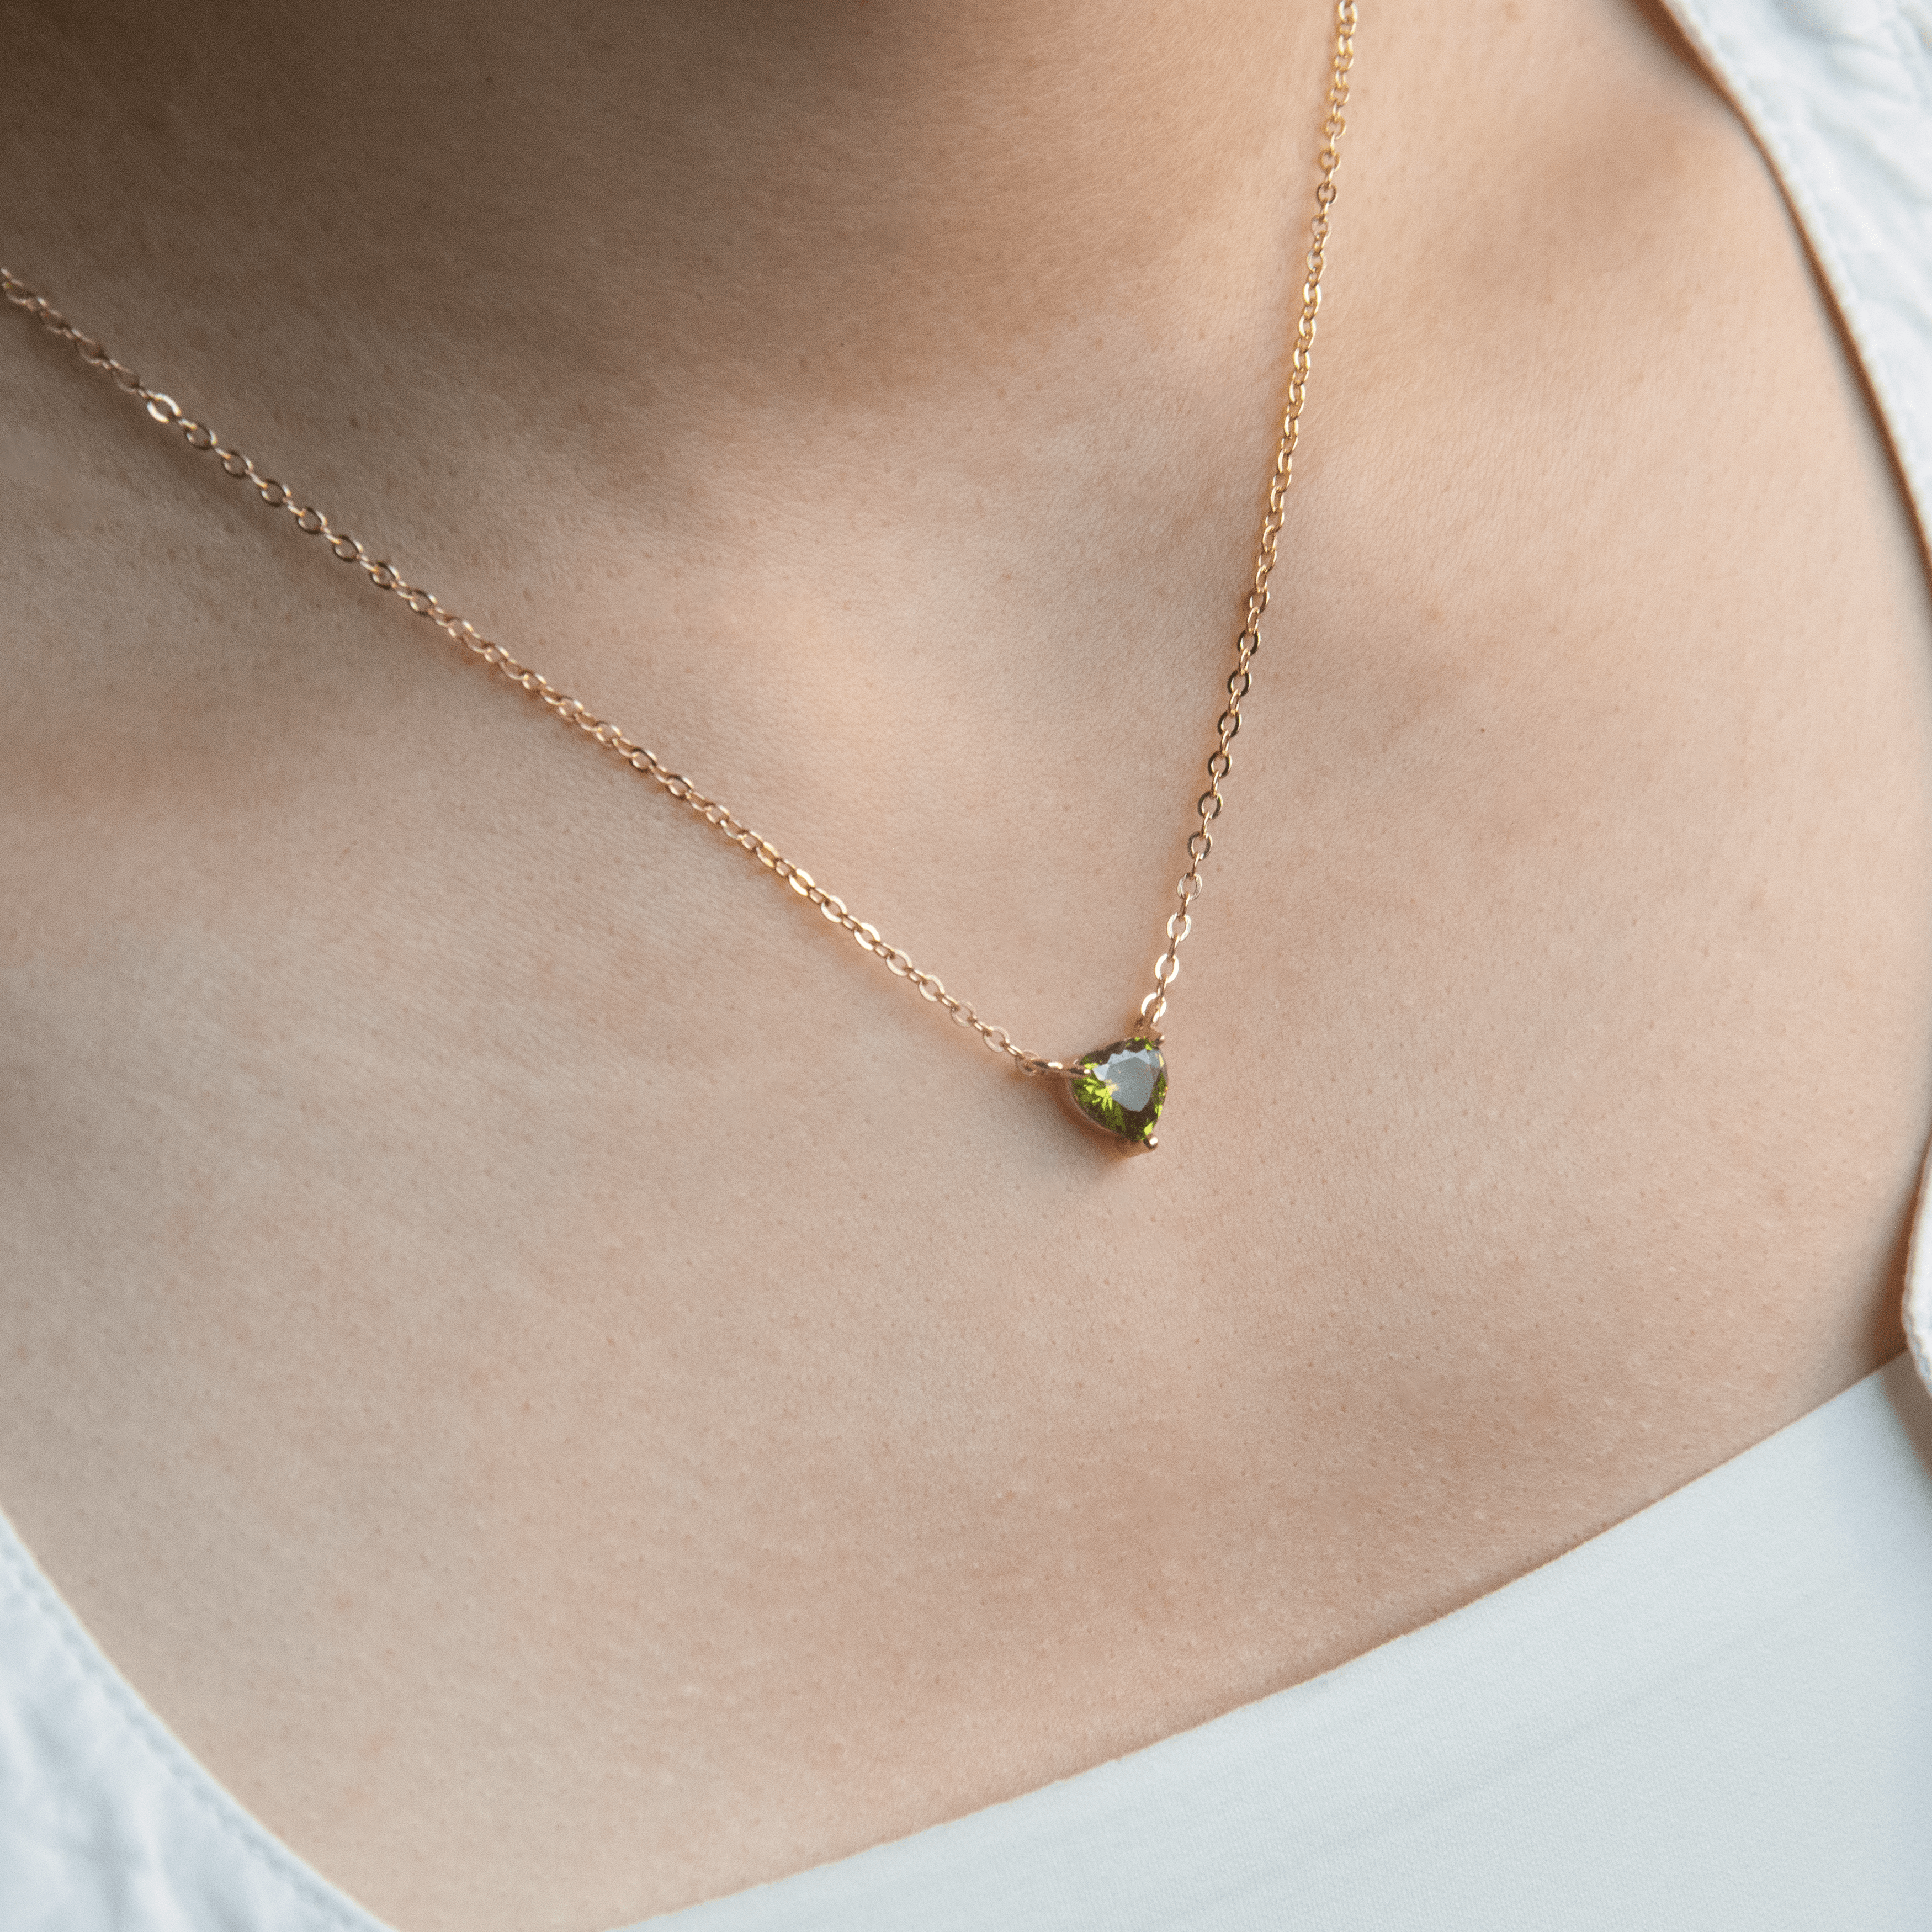 Sapphire + Tourmaline Necklace by Margaret Solow at Abacus Row Jewelry |  Abacus Row | Handmade Jewelry